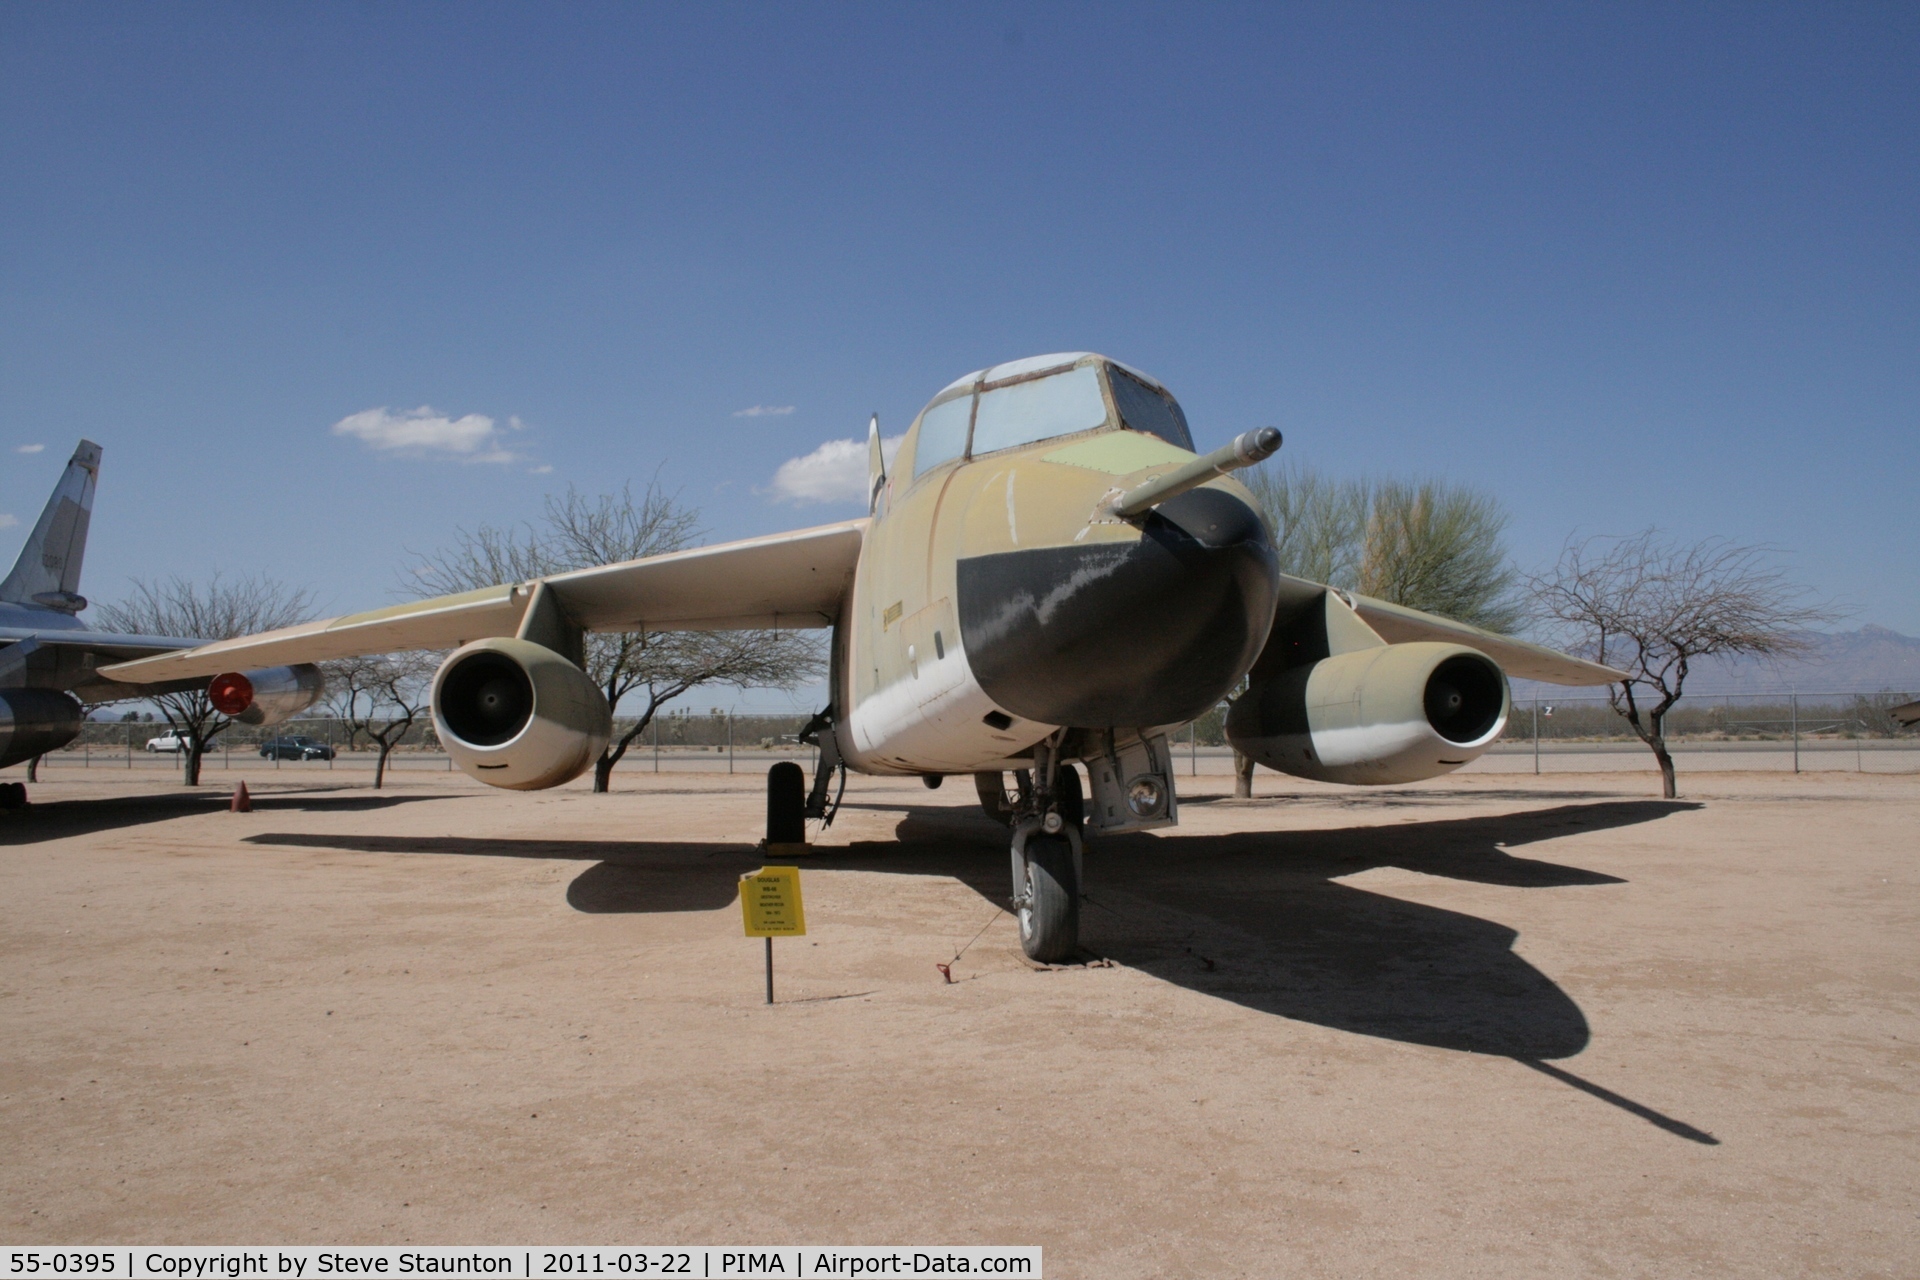 55-0395, 1955 Douglas WB-66D Destroyer C/N 45027, Taken at Pima Air and Space Museum, in March 2011 whilst on an Aeroprint Aviation tour